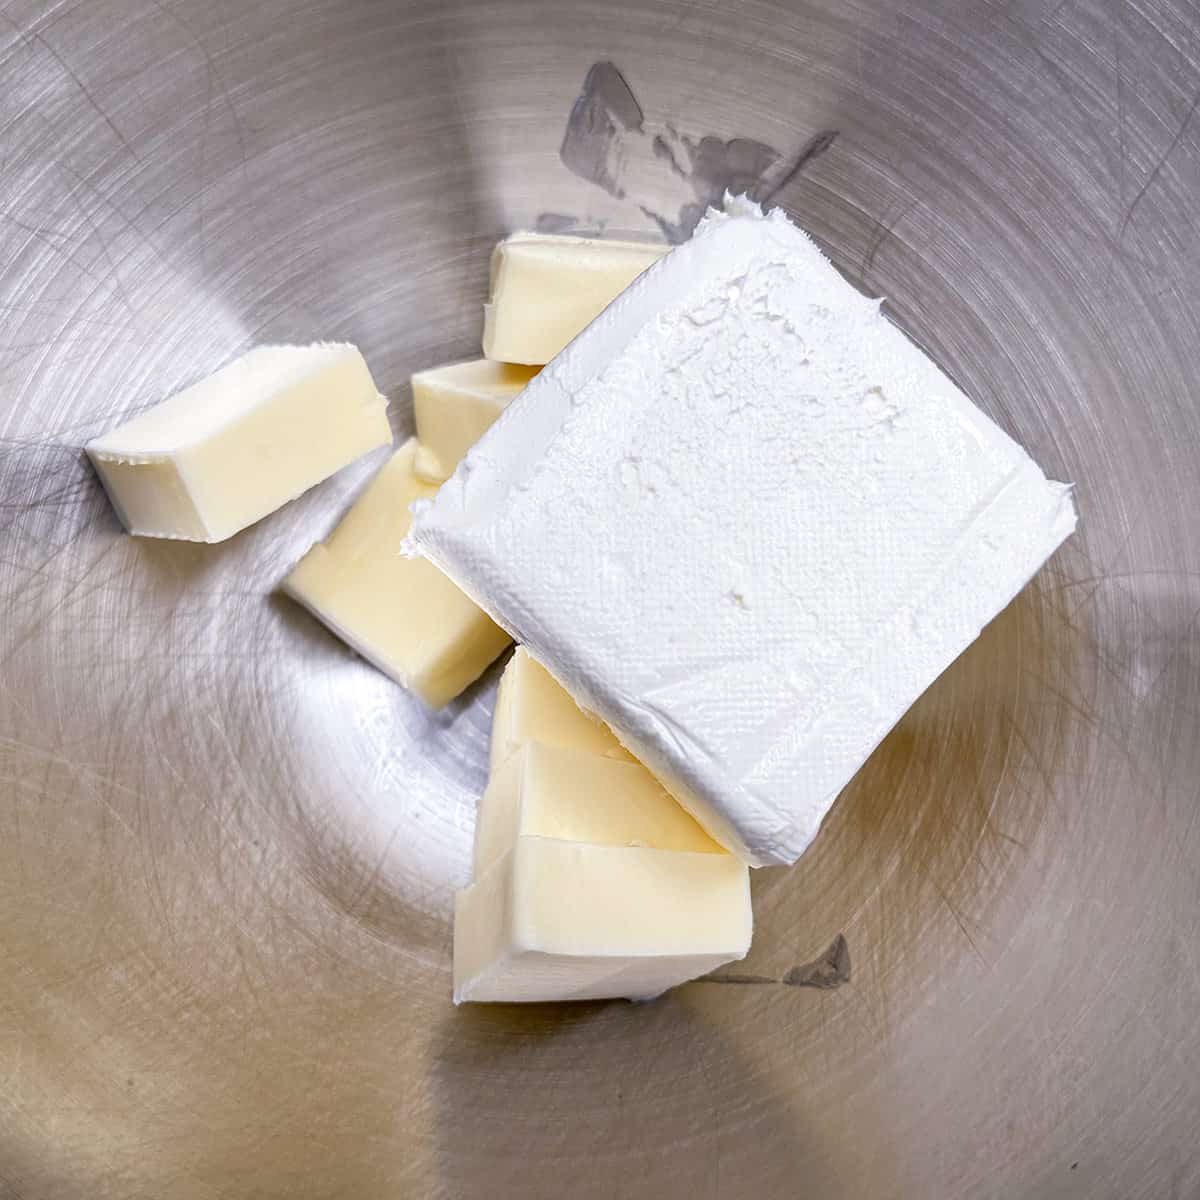 Cubed butter and a block of cream cheese ready to be mixed.